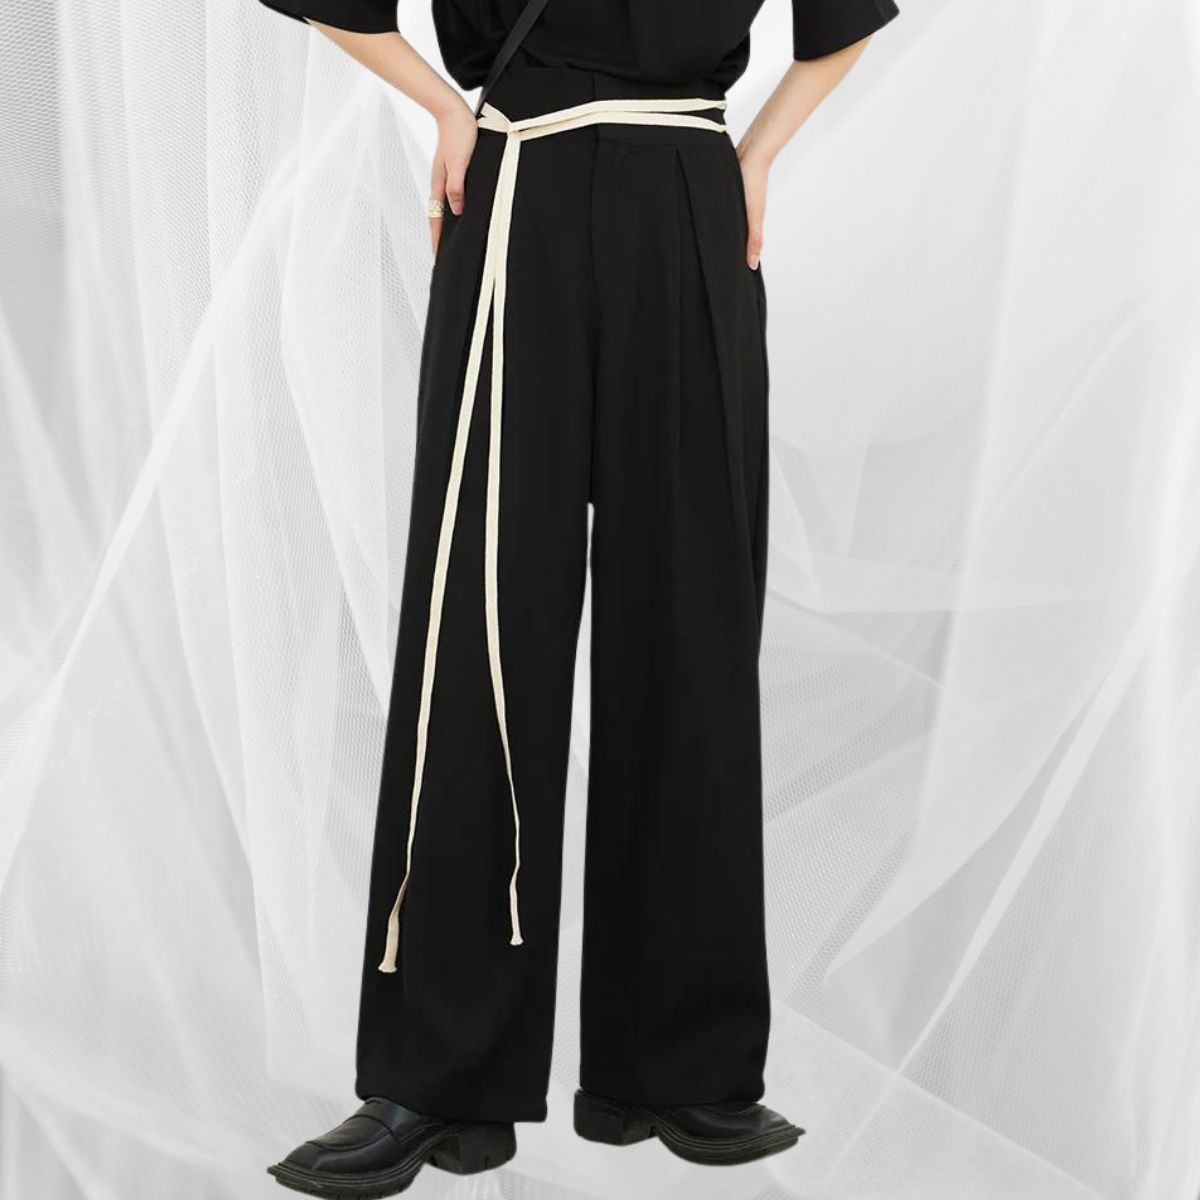 Casual Minimal Goth Belted Trousers